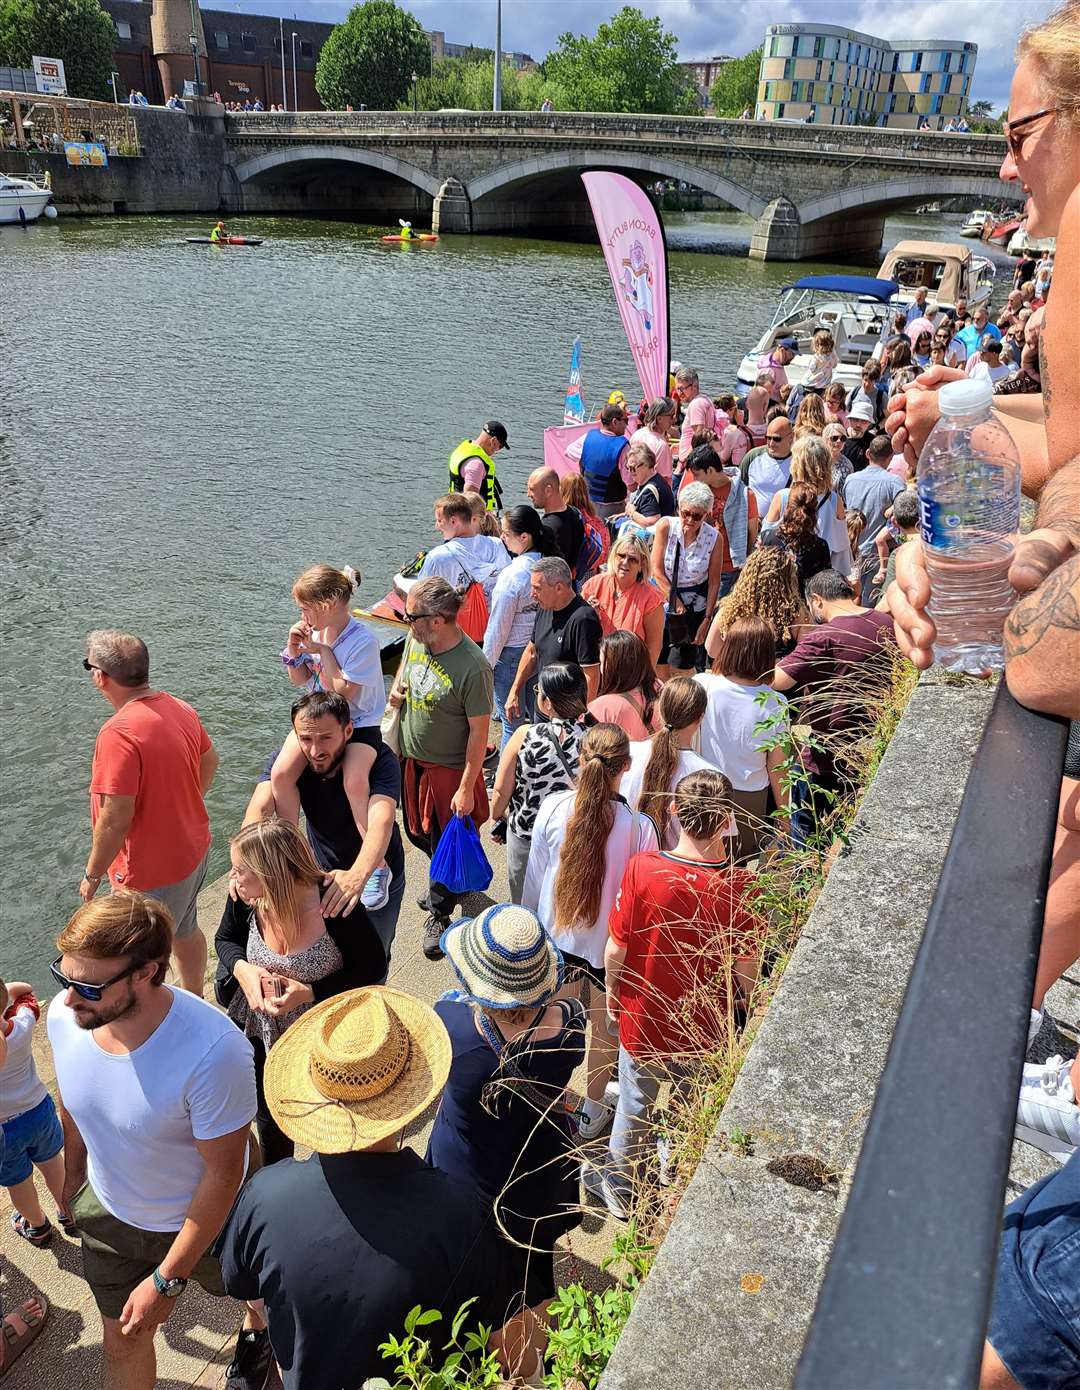 The riverbank was packed with people for the Maidstone River Festival